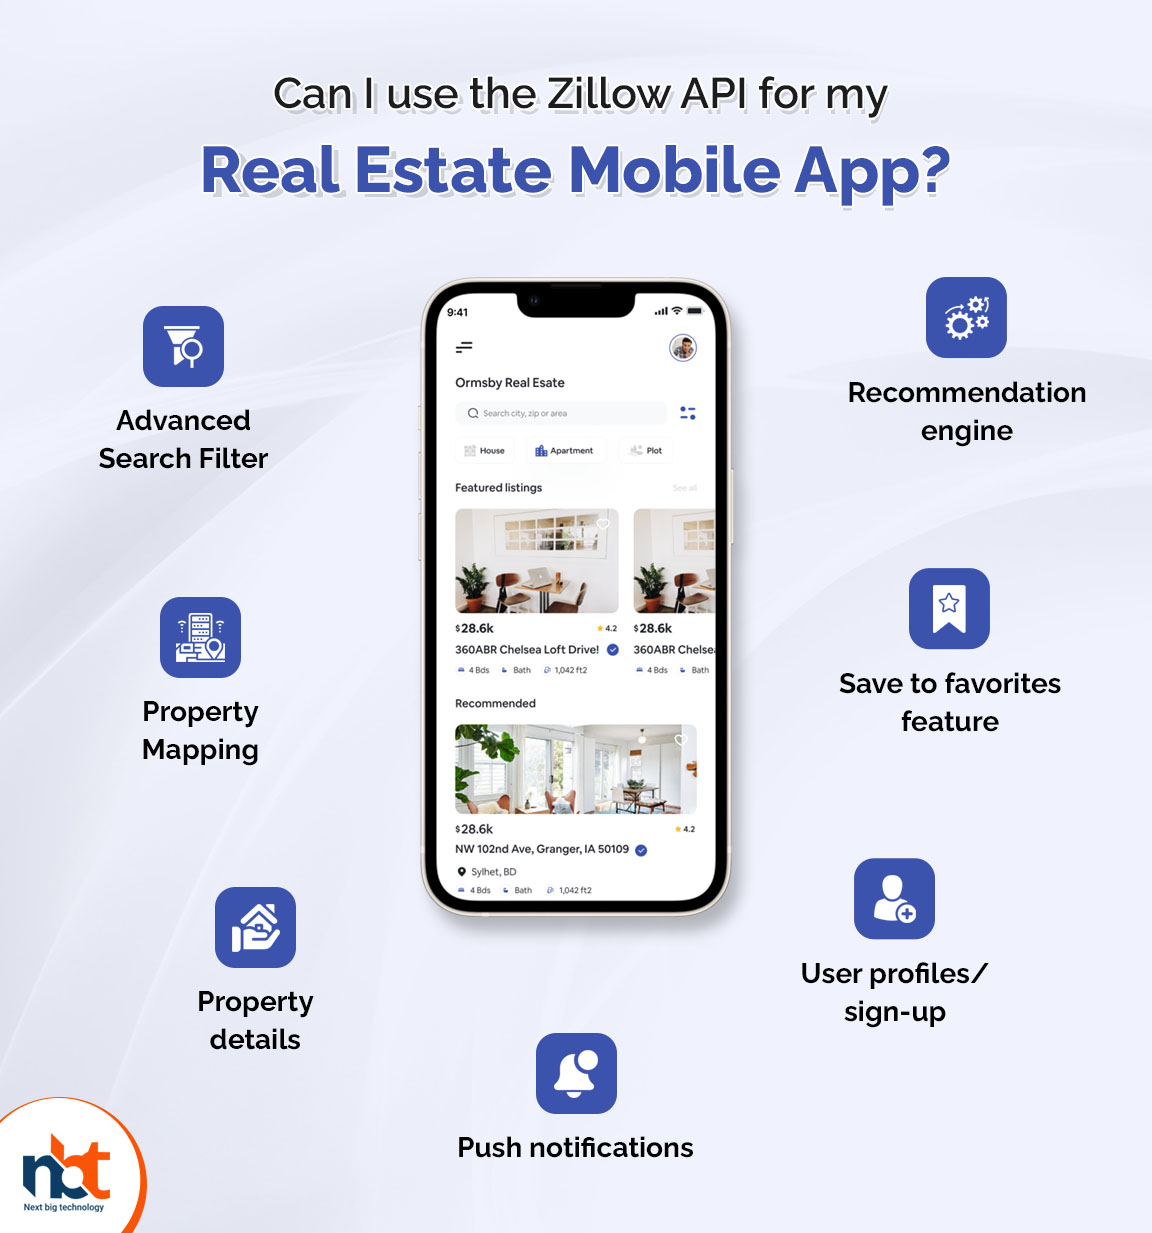 Can I use the Zillow API for my real estate mobile app